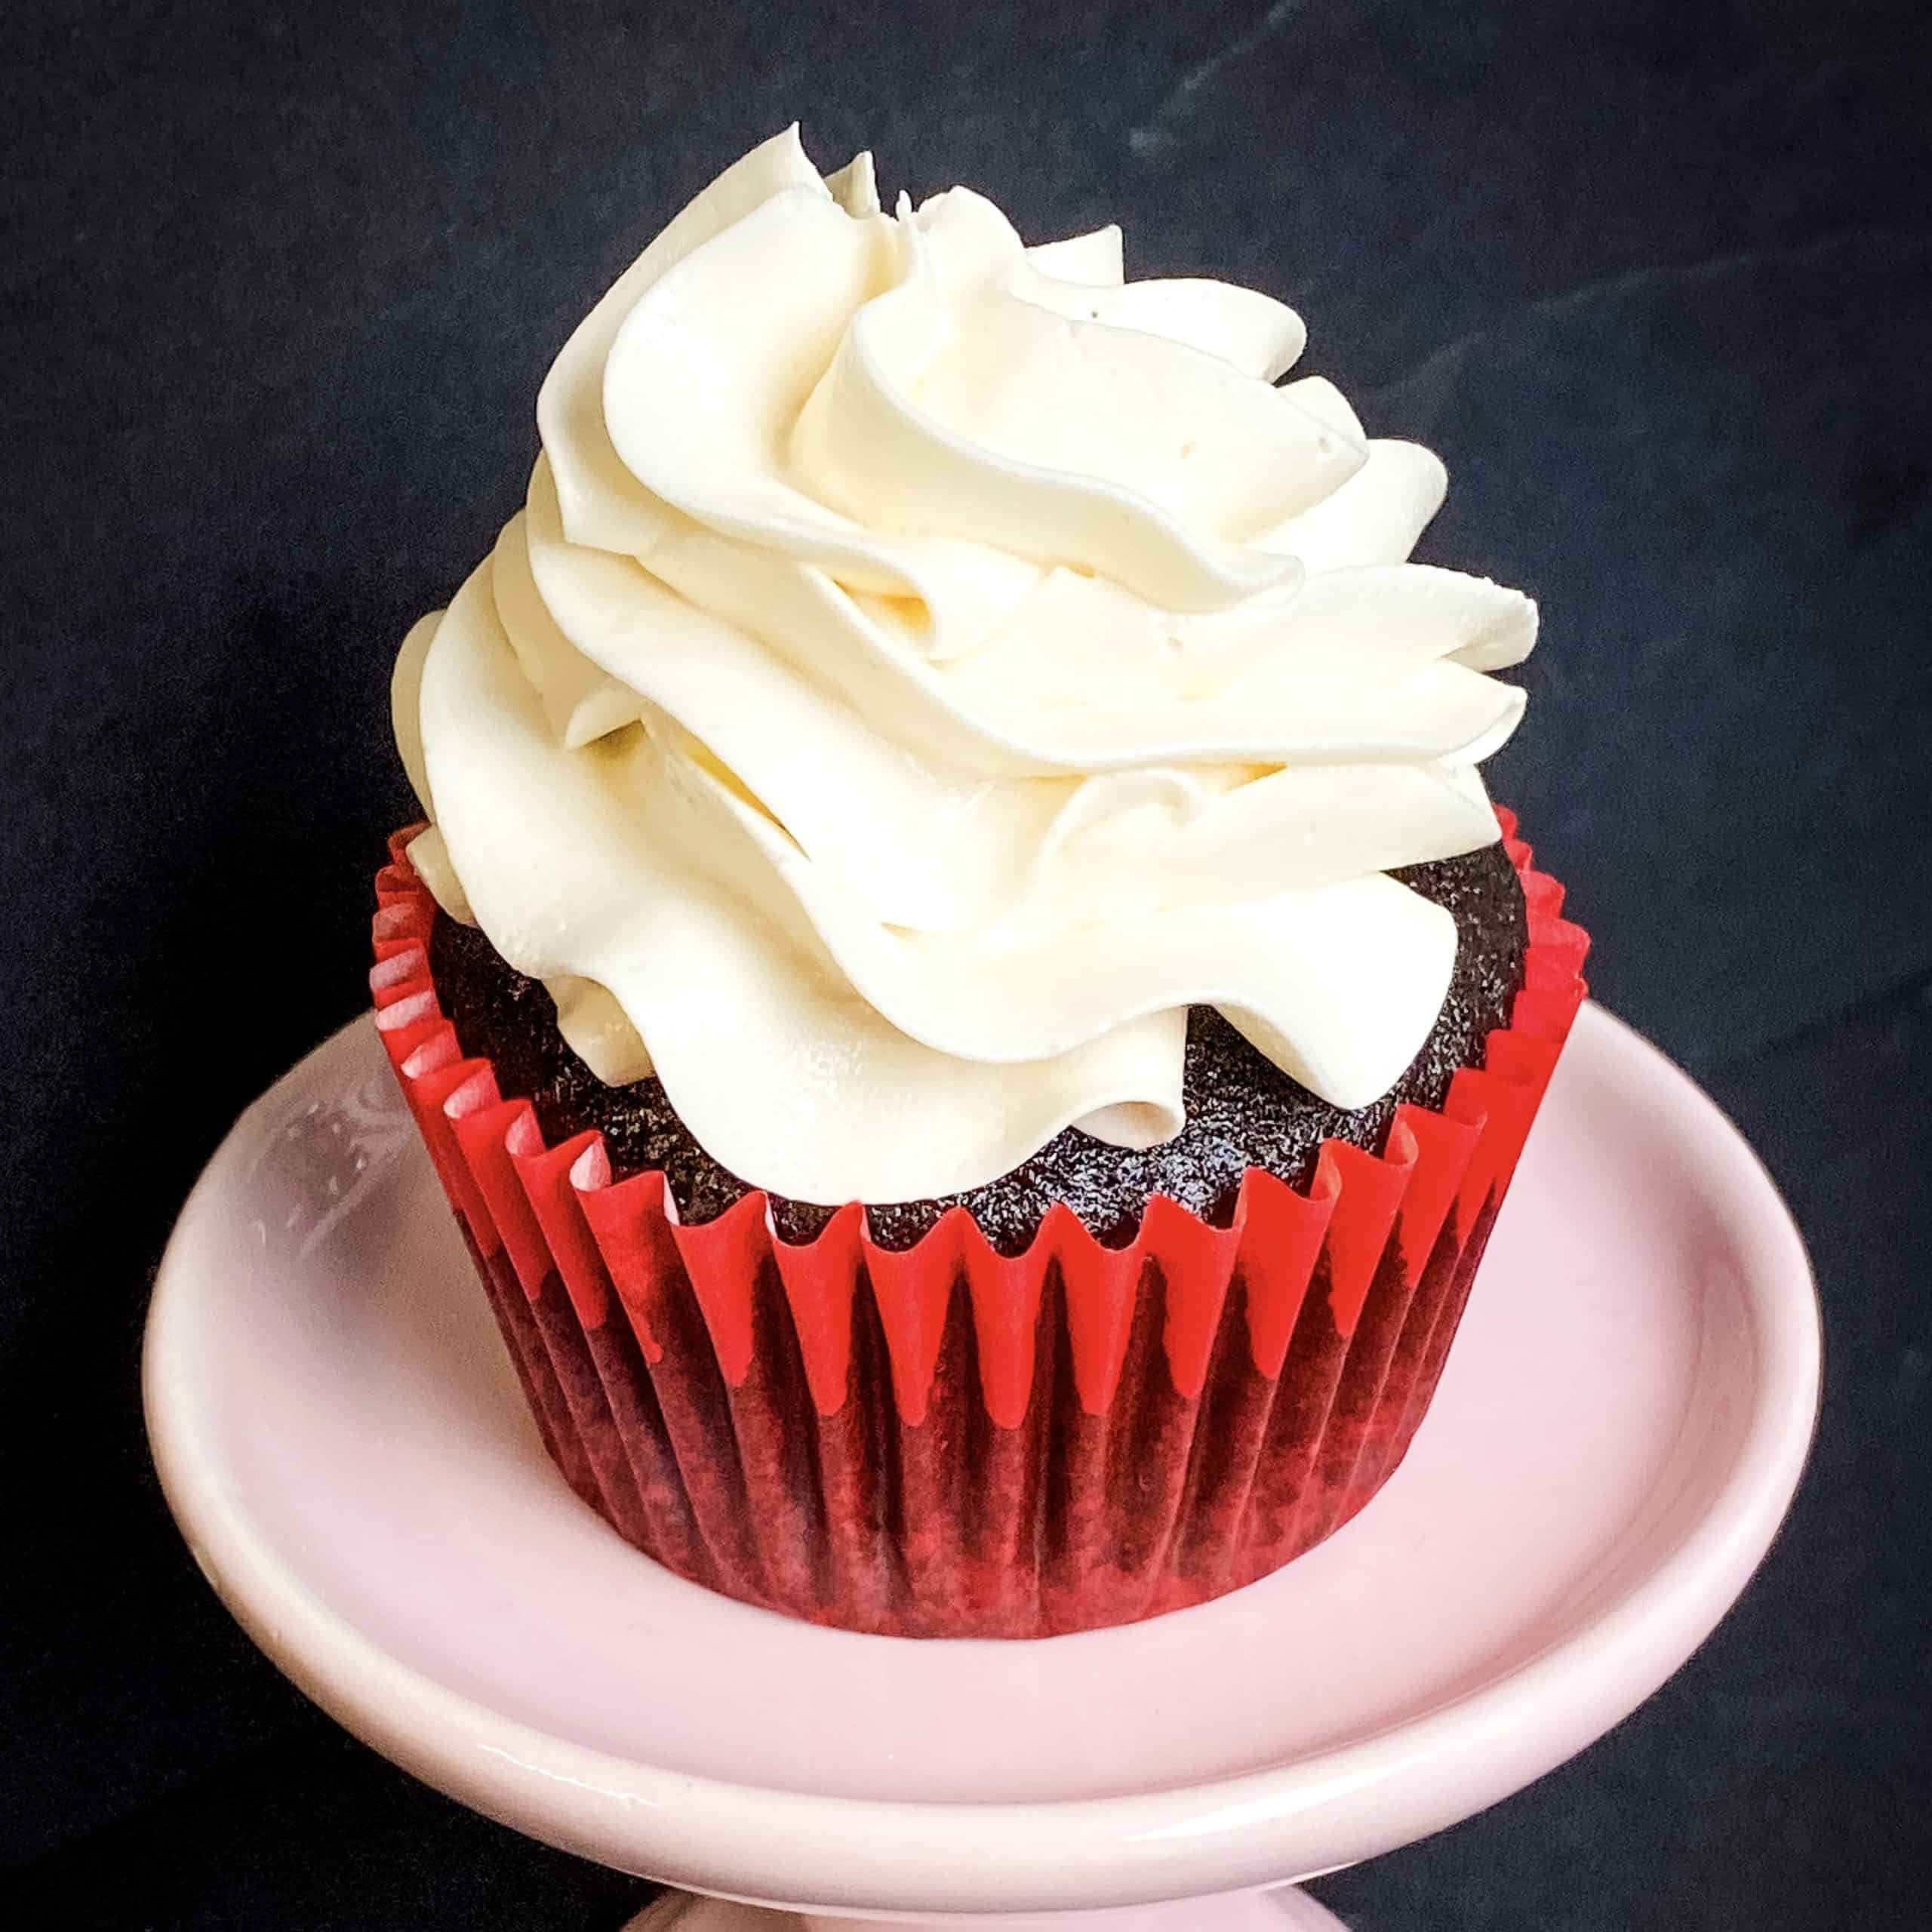 a cupcake with vanilla buttercream swirlled on top. it has a red case and is sitting on a pink cupcake stand with a black background.